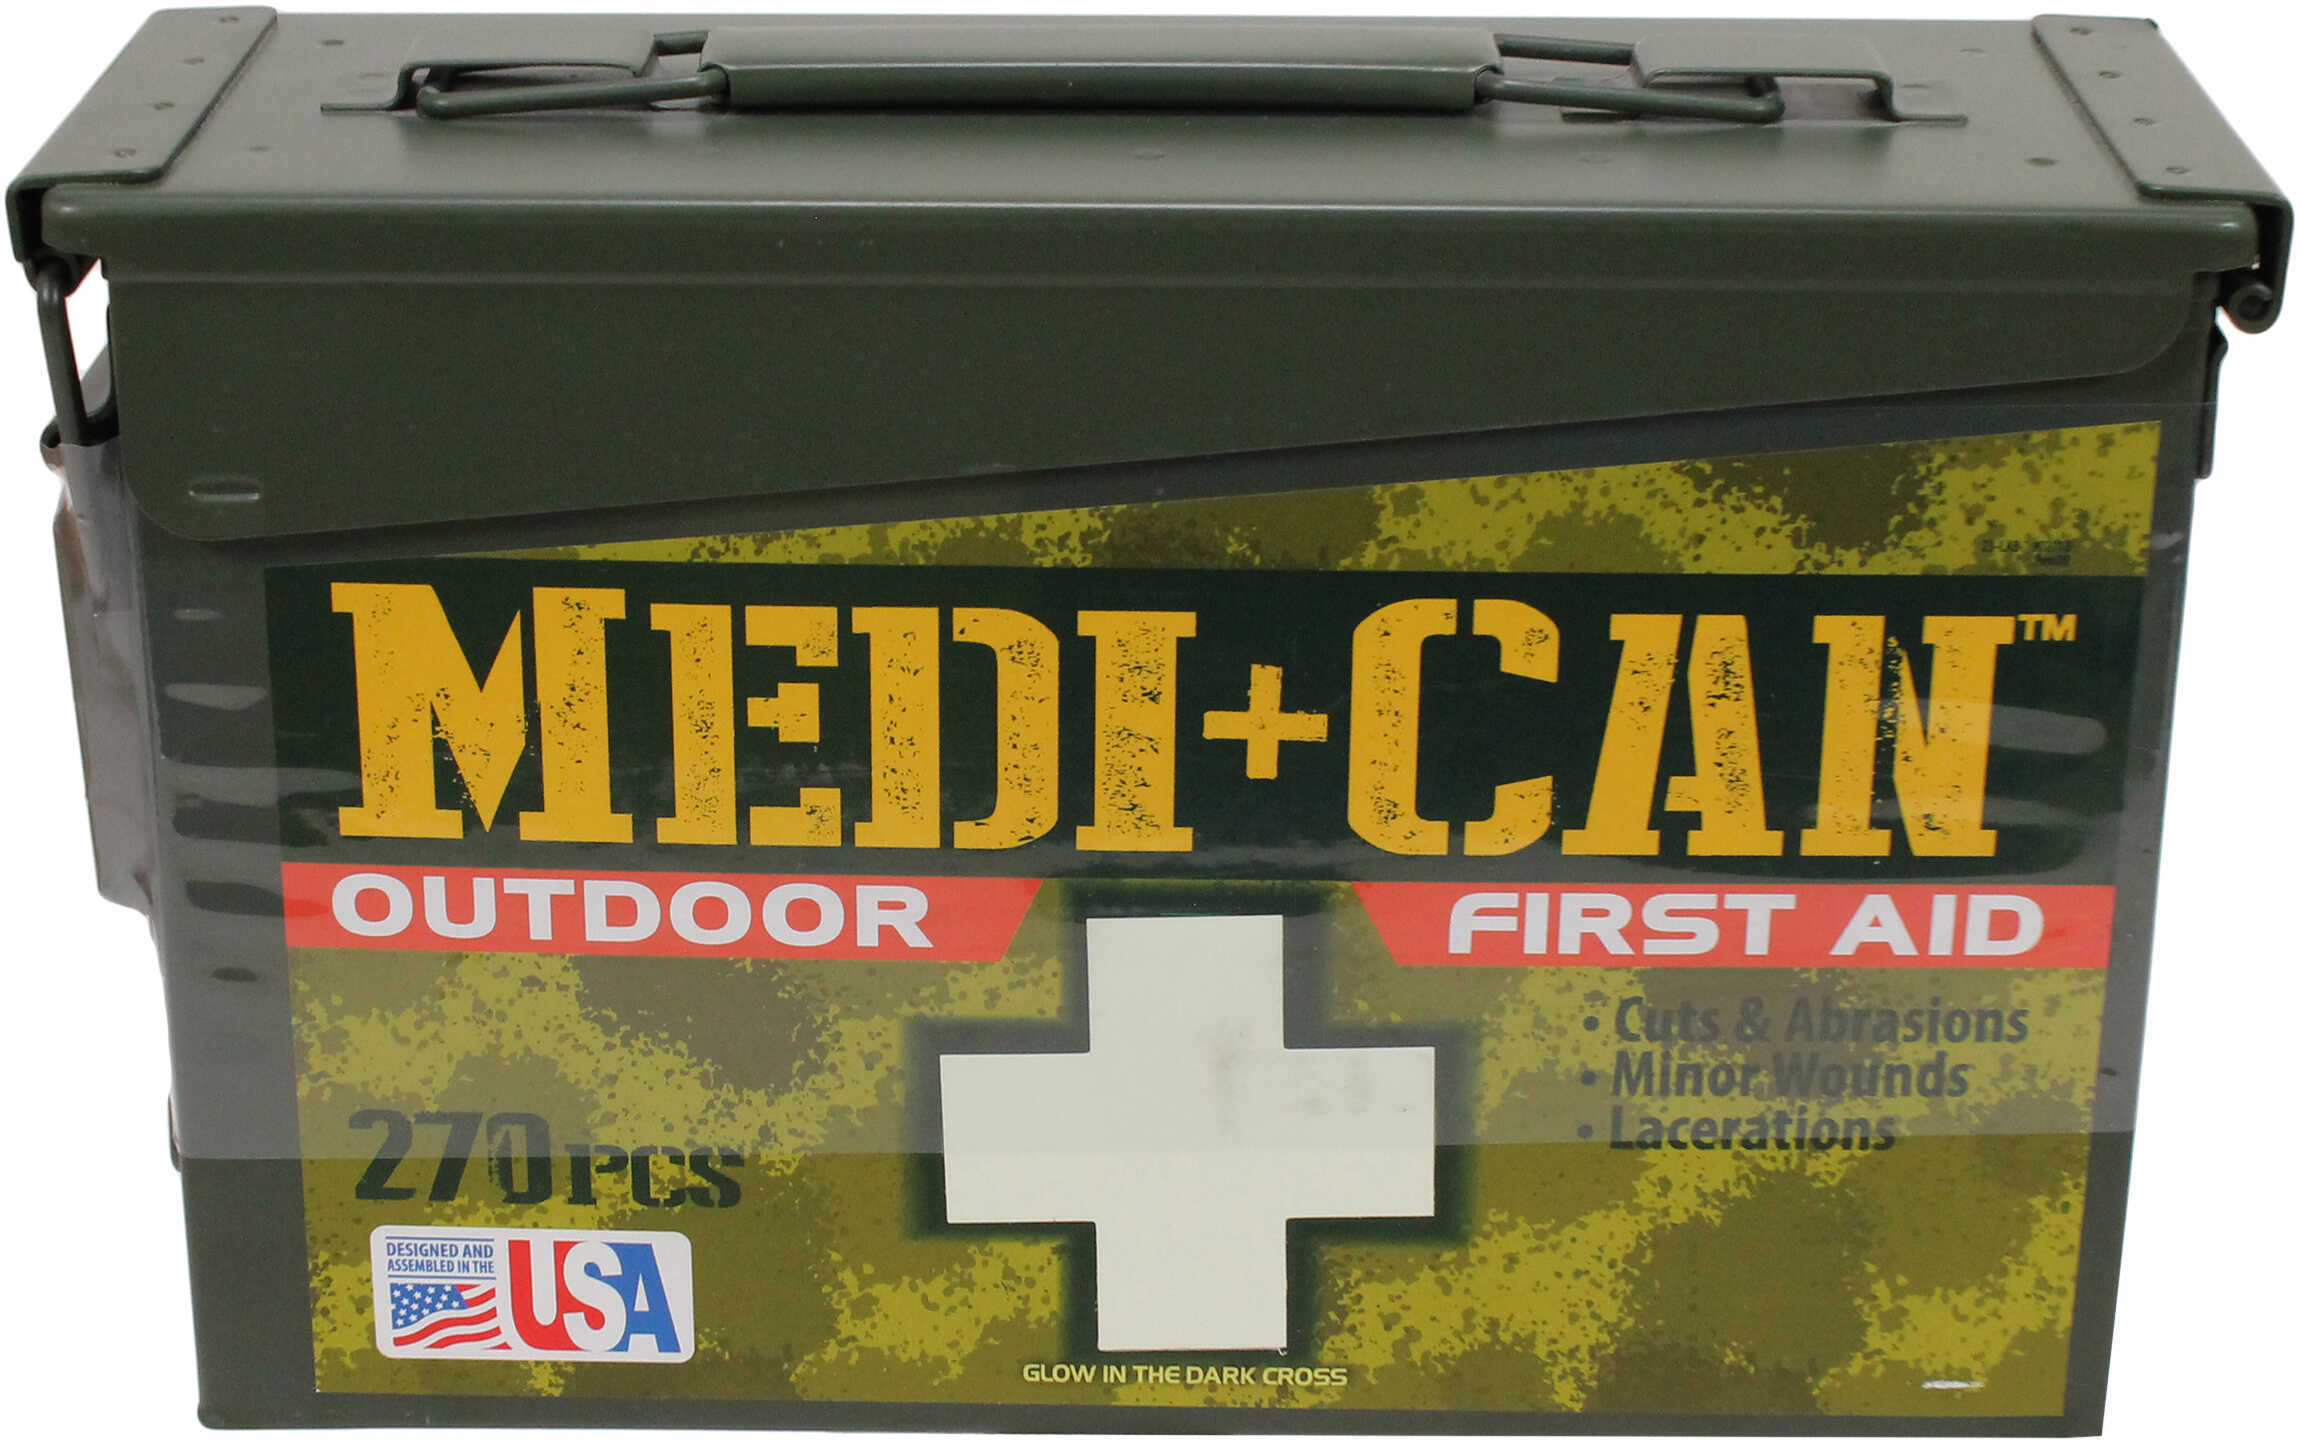 Wise Company 270 Piece First Aid Kit Includes: 20 Cotton Tip Applications 4 Finger Splints 1 Instruction Guide